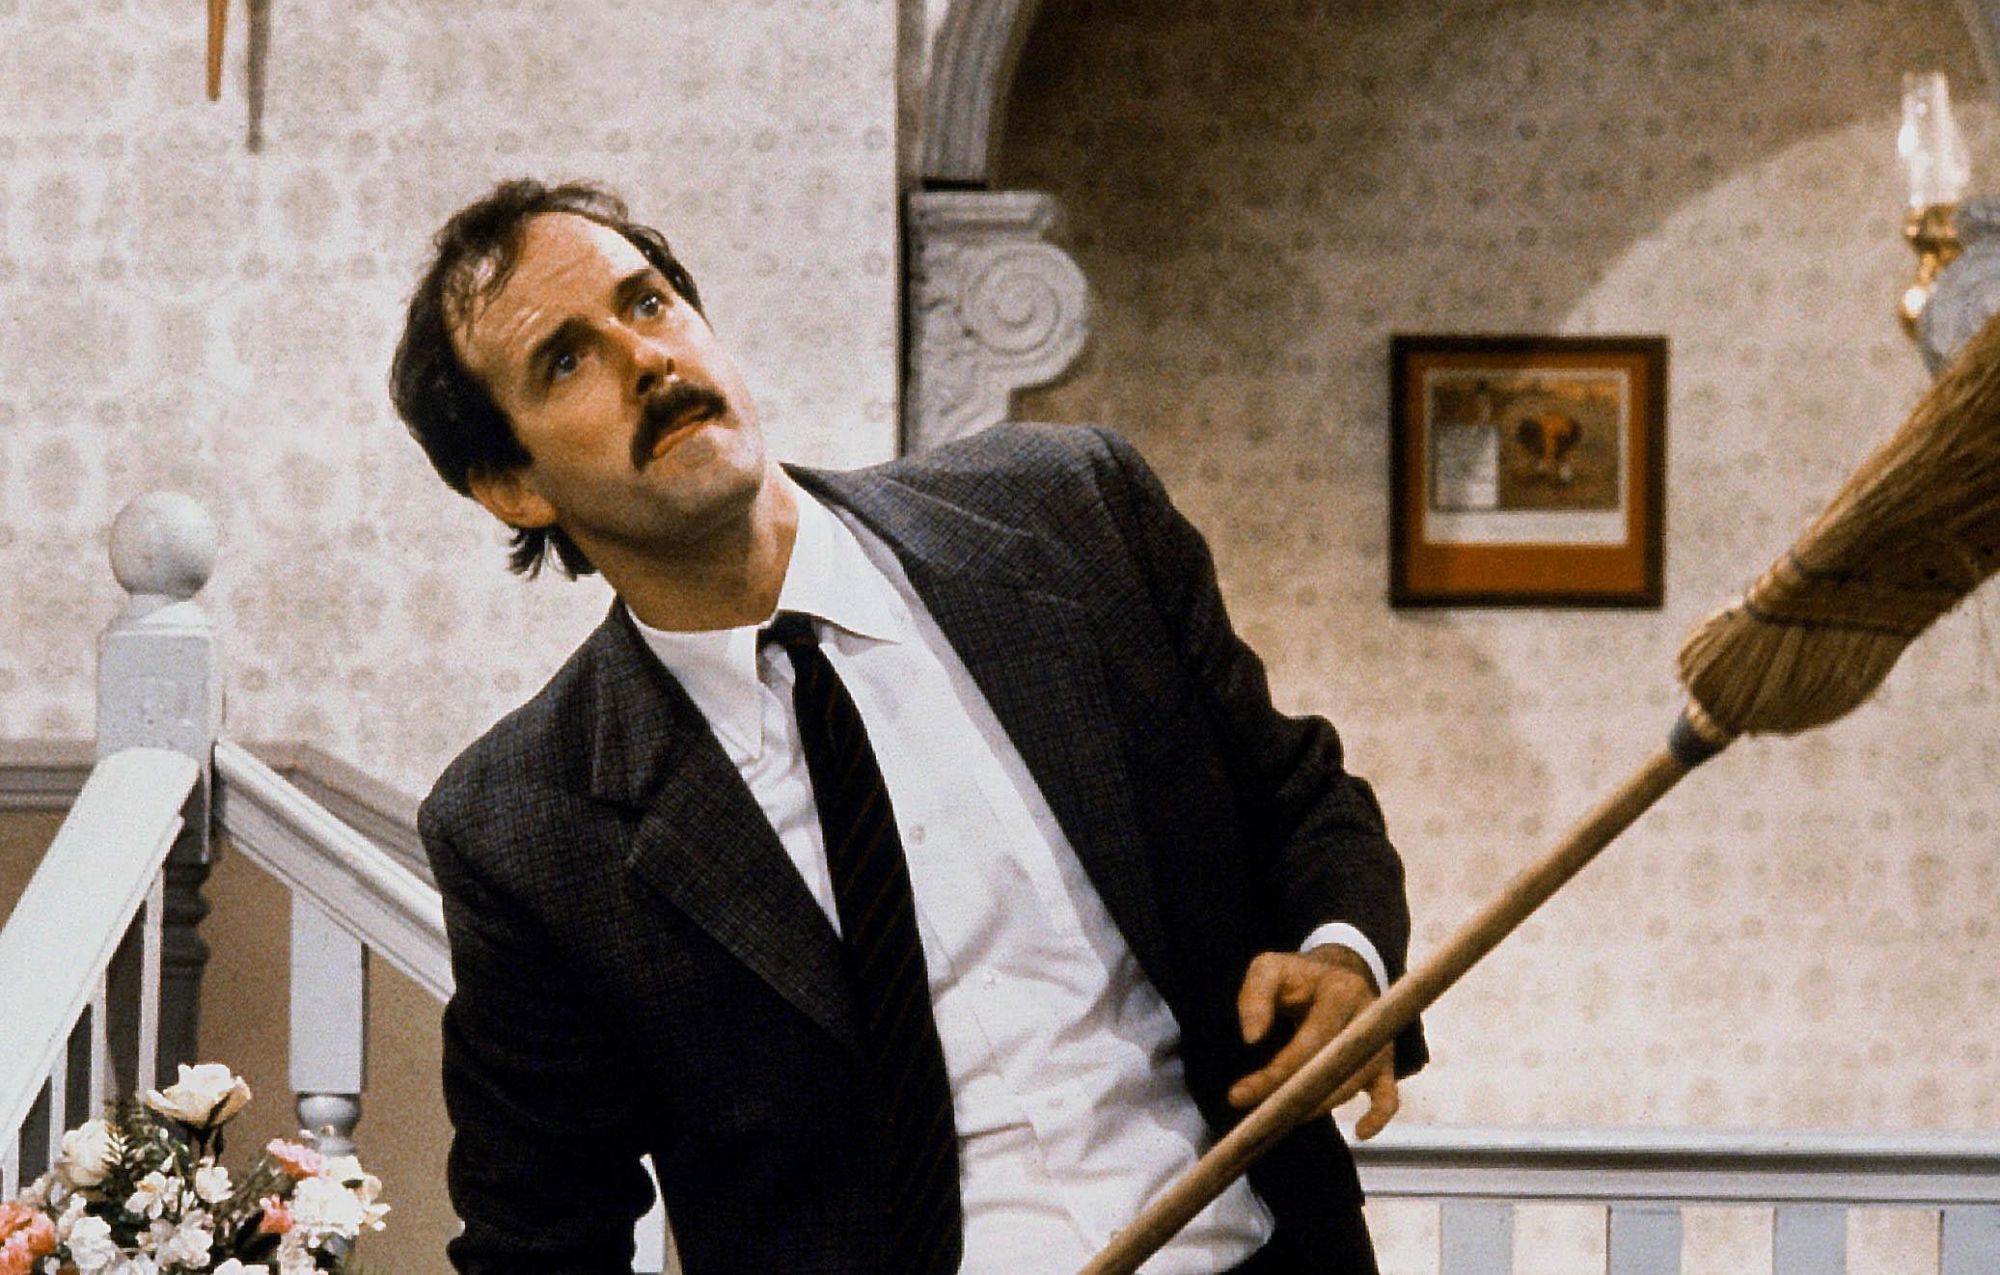 John Cleese says he snubbed BBC for ‘Fawlty Towers’ reboot